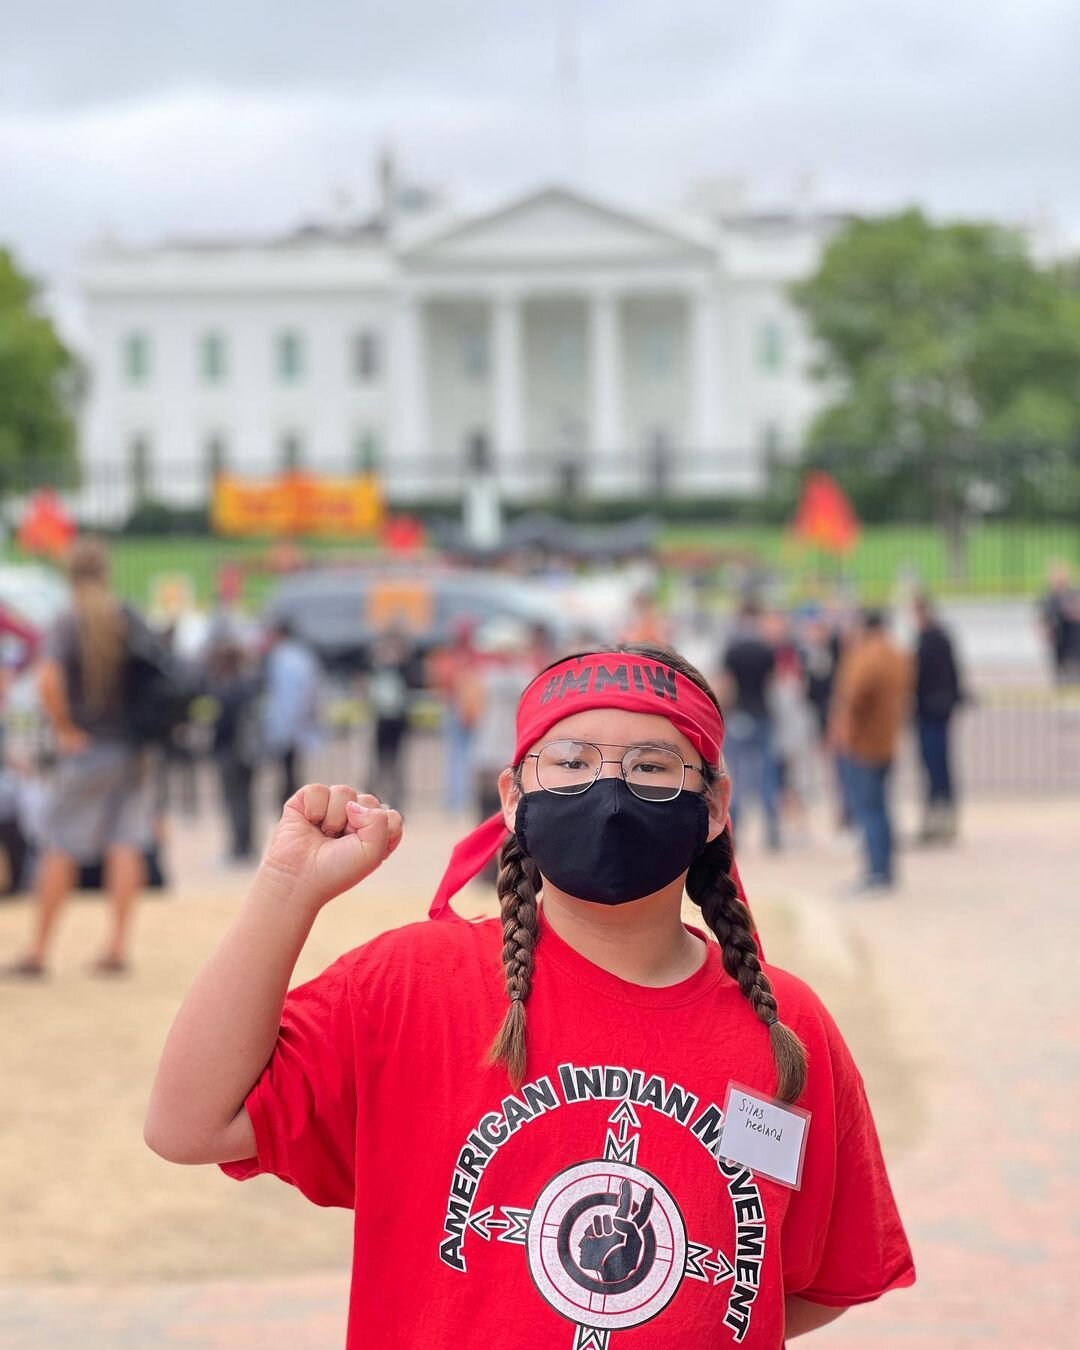  Silas was arrested today in front of the nations Capitol for the last day of Indigenous people from many nations coming together to ask  @potus  and law makers to wake up.  #waterprotector   #coalition   #peoplevsfossilfuels   #indigenous   #youth  